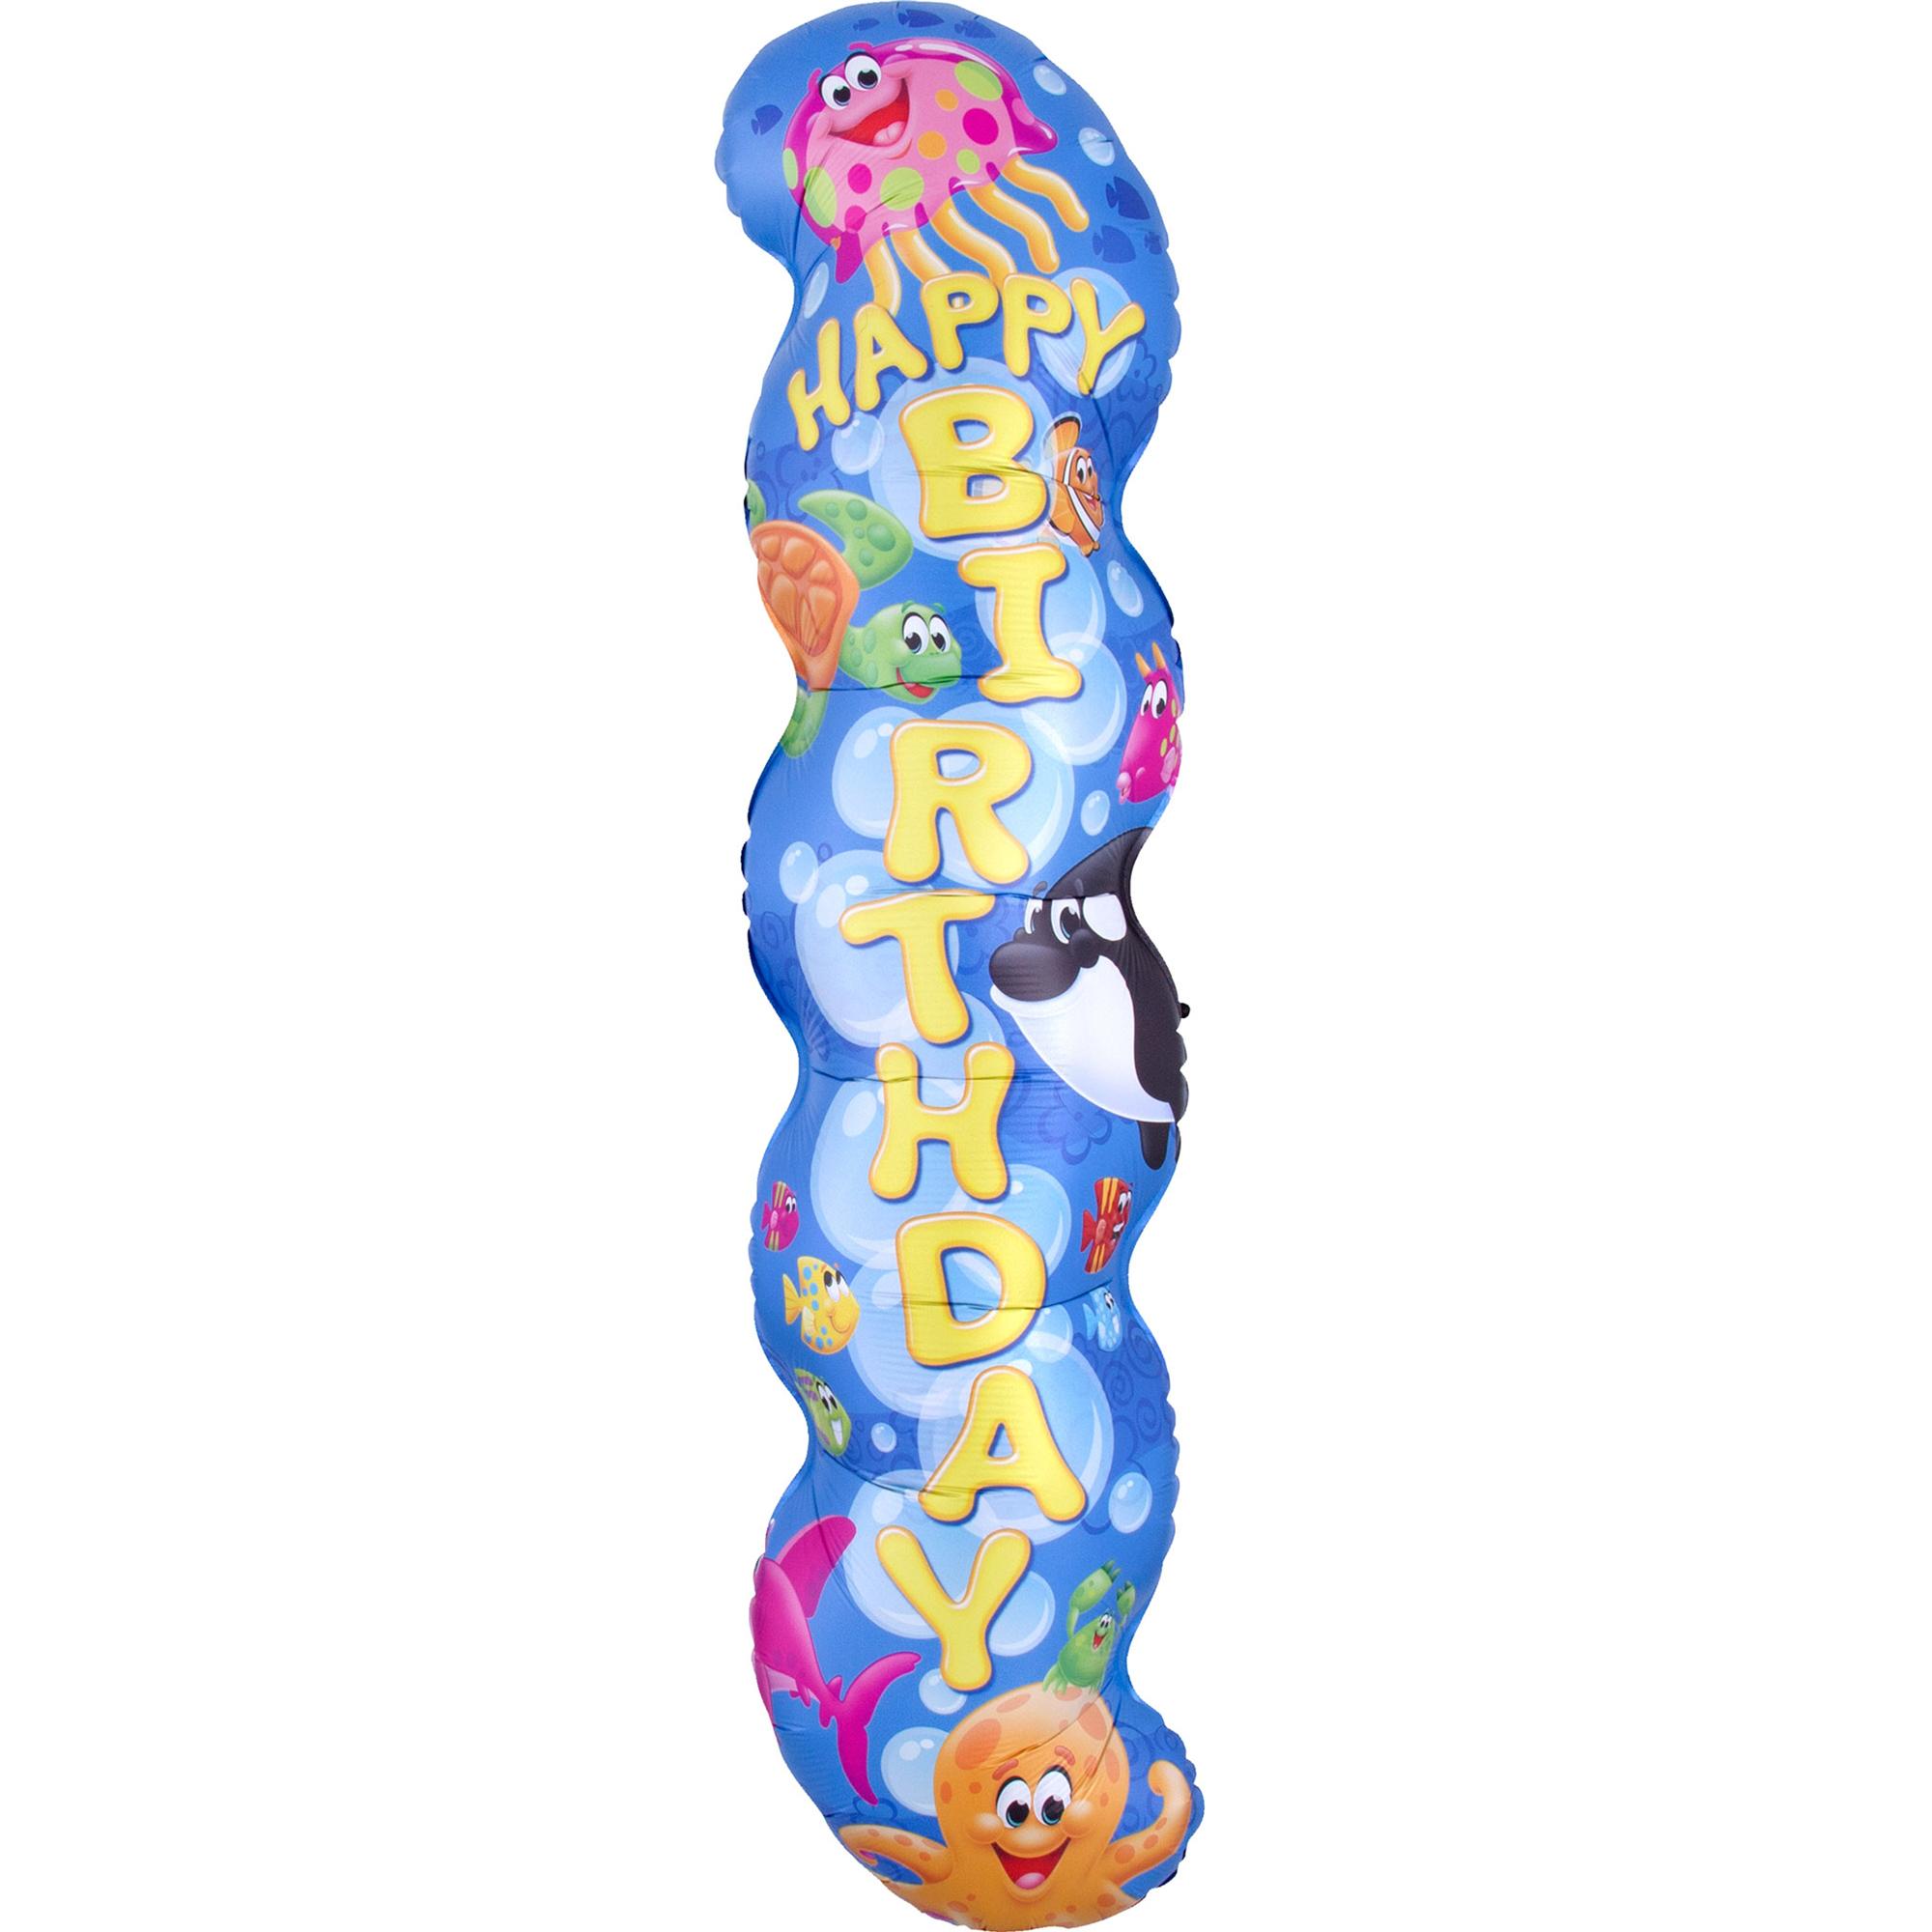 Sea Buddies Trend Birthday SuperShape Balloon 25x101cm Balloons & Streamers - Party Centre